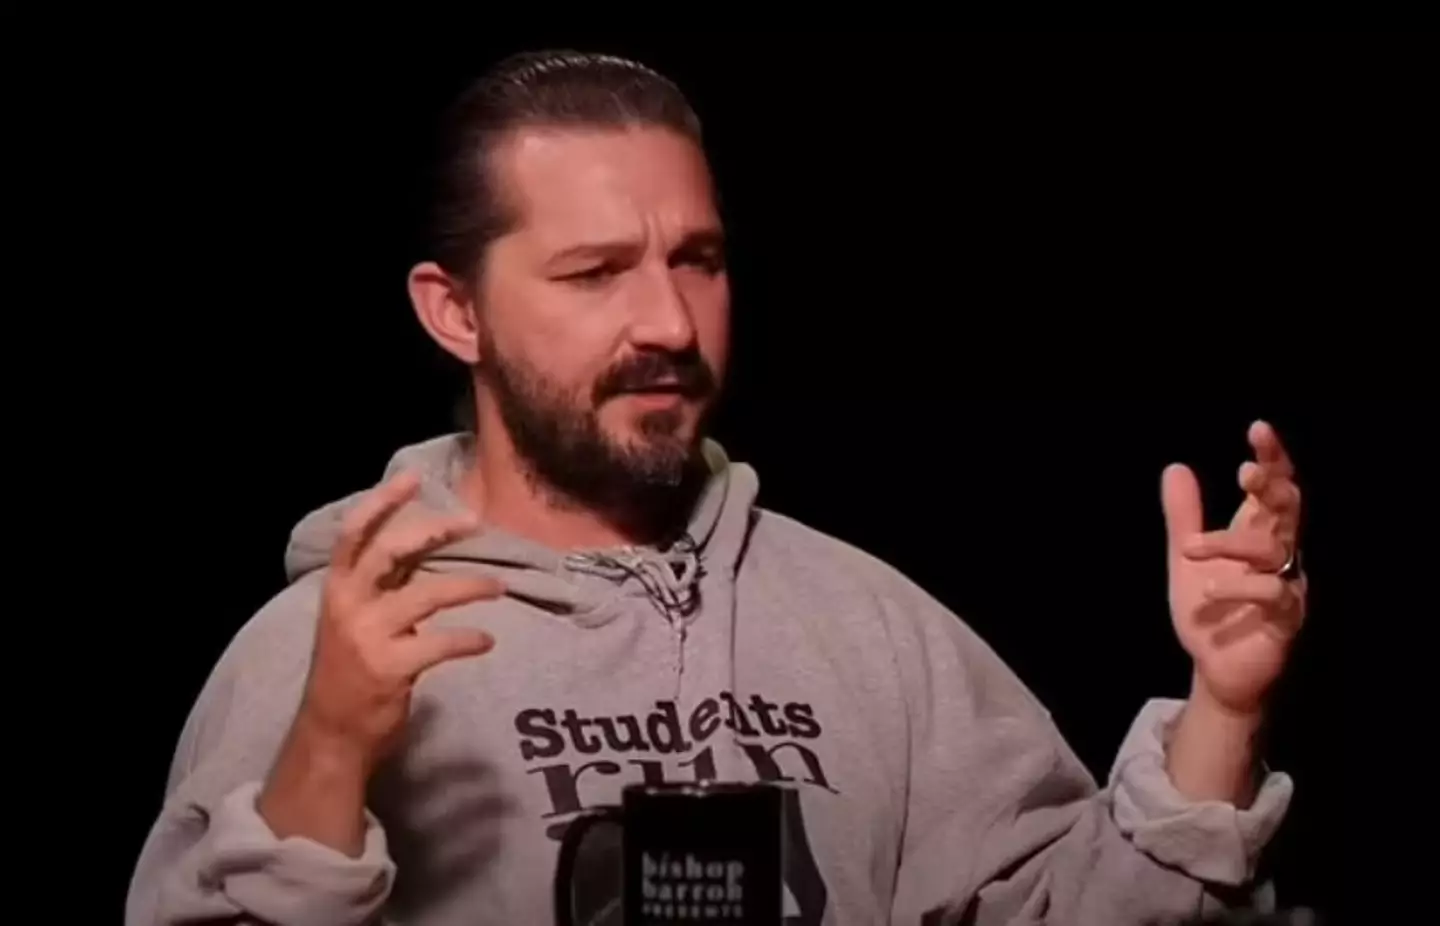 Shia LeBeouf contemplated suicide before turning to Catholicism.